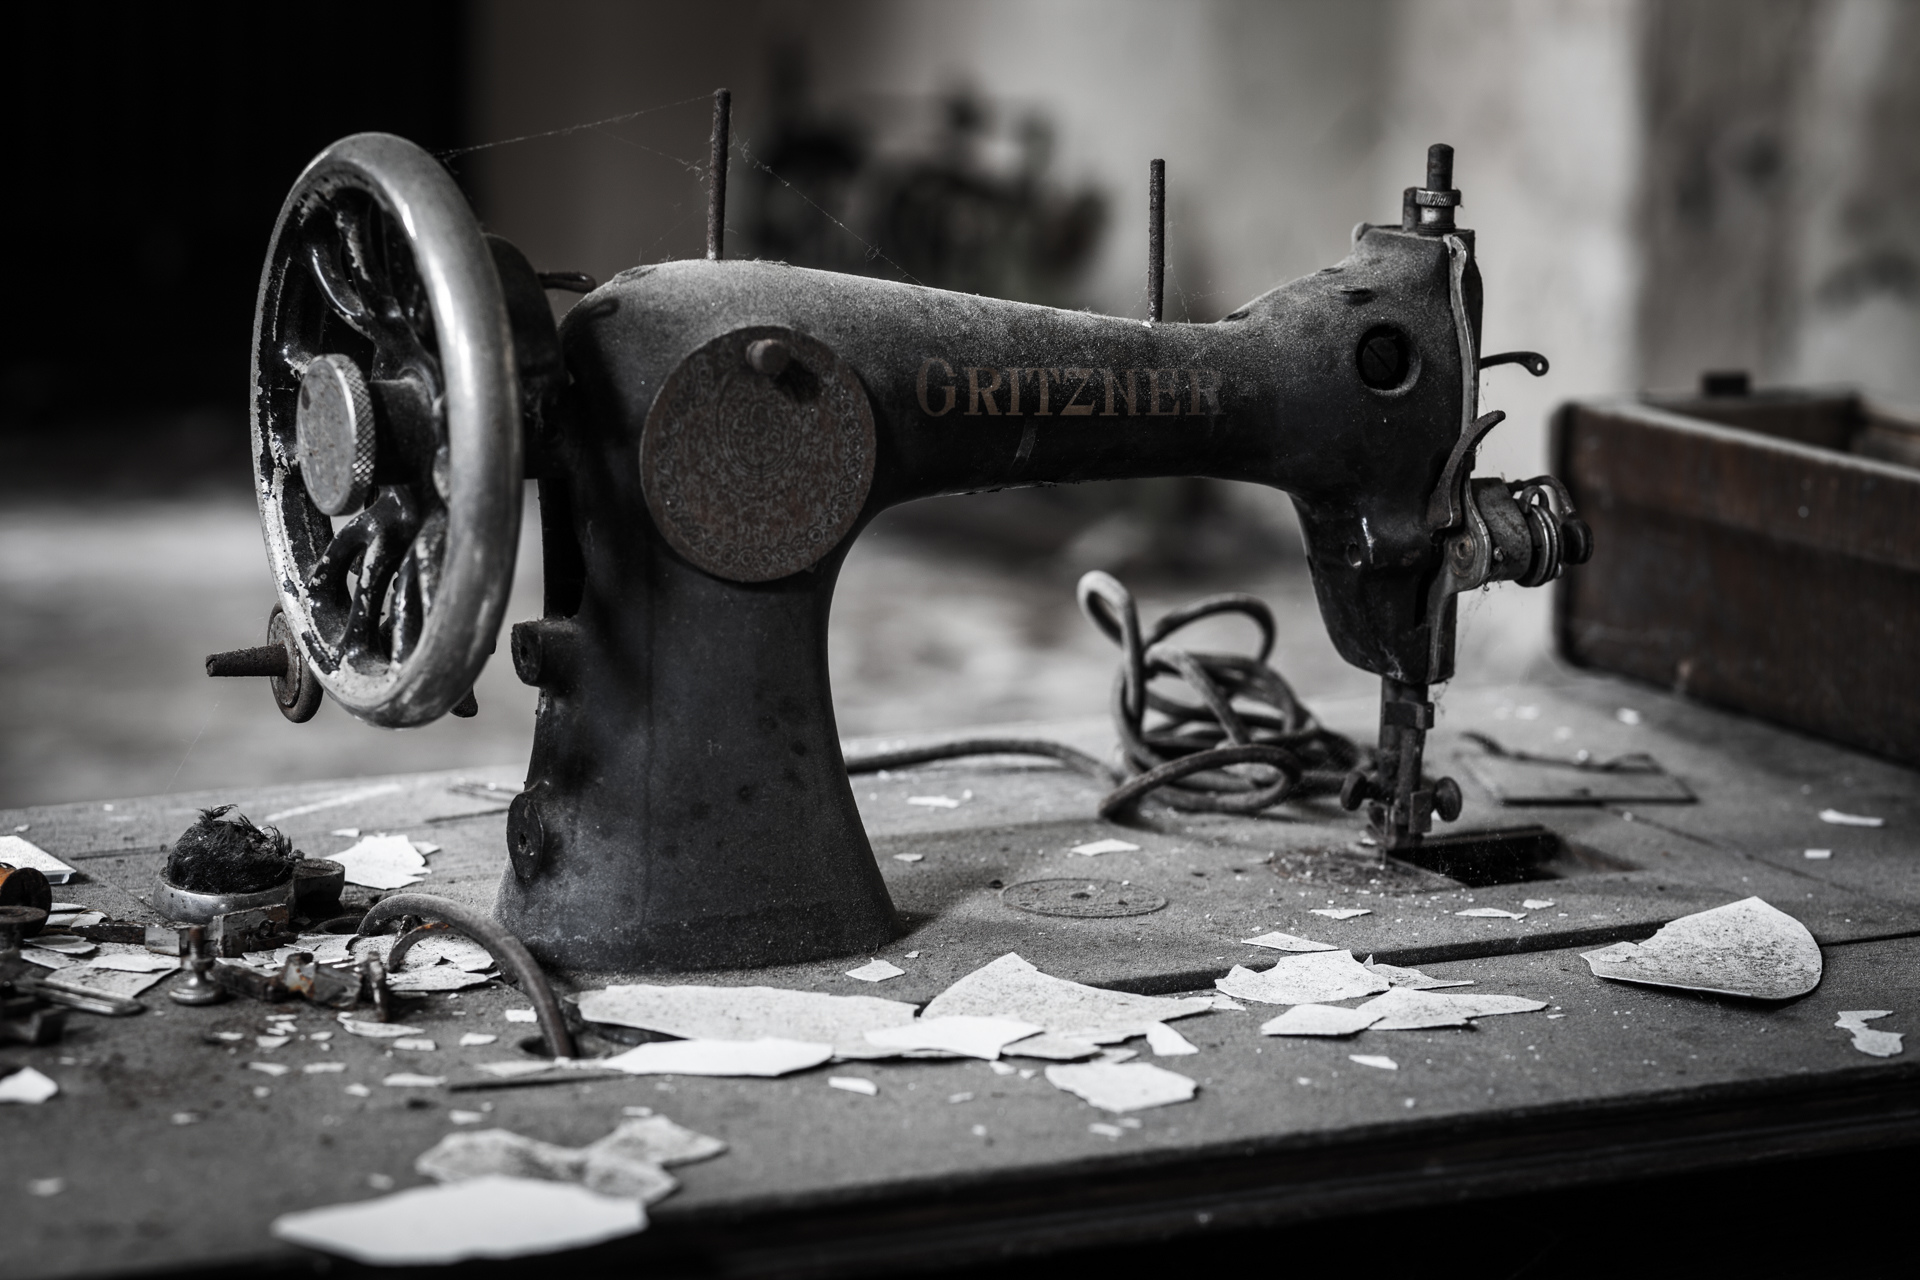 Urban Exploration - Soldier School - Stopped Sewing